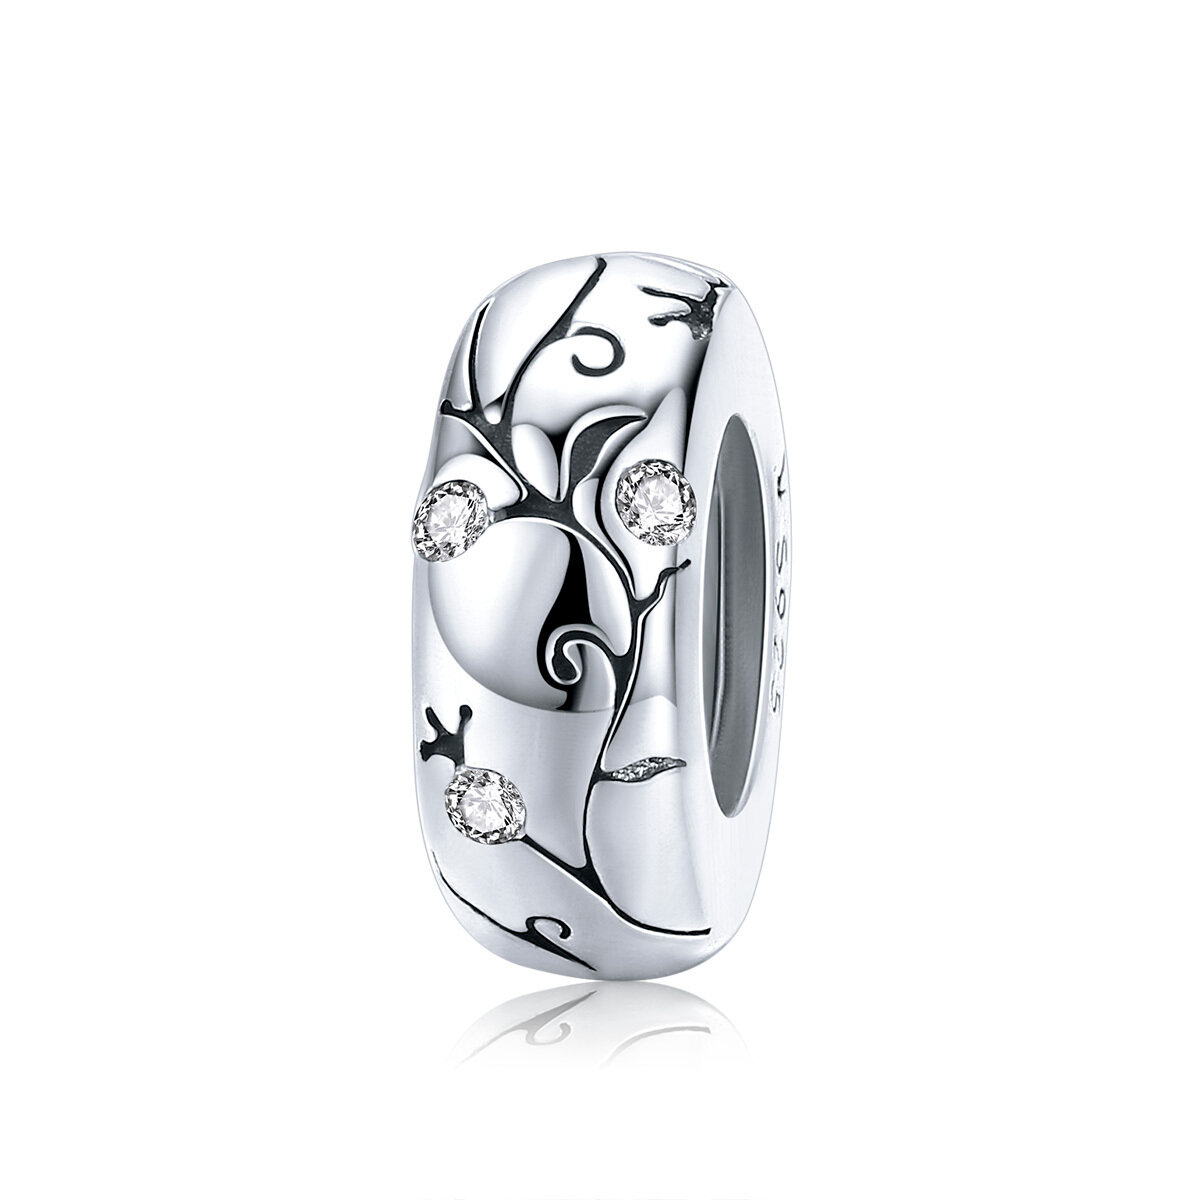 GemKing SCC1559 Classical pattern-silver silicone  S925 Sterling Silver Charm